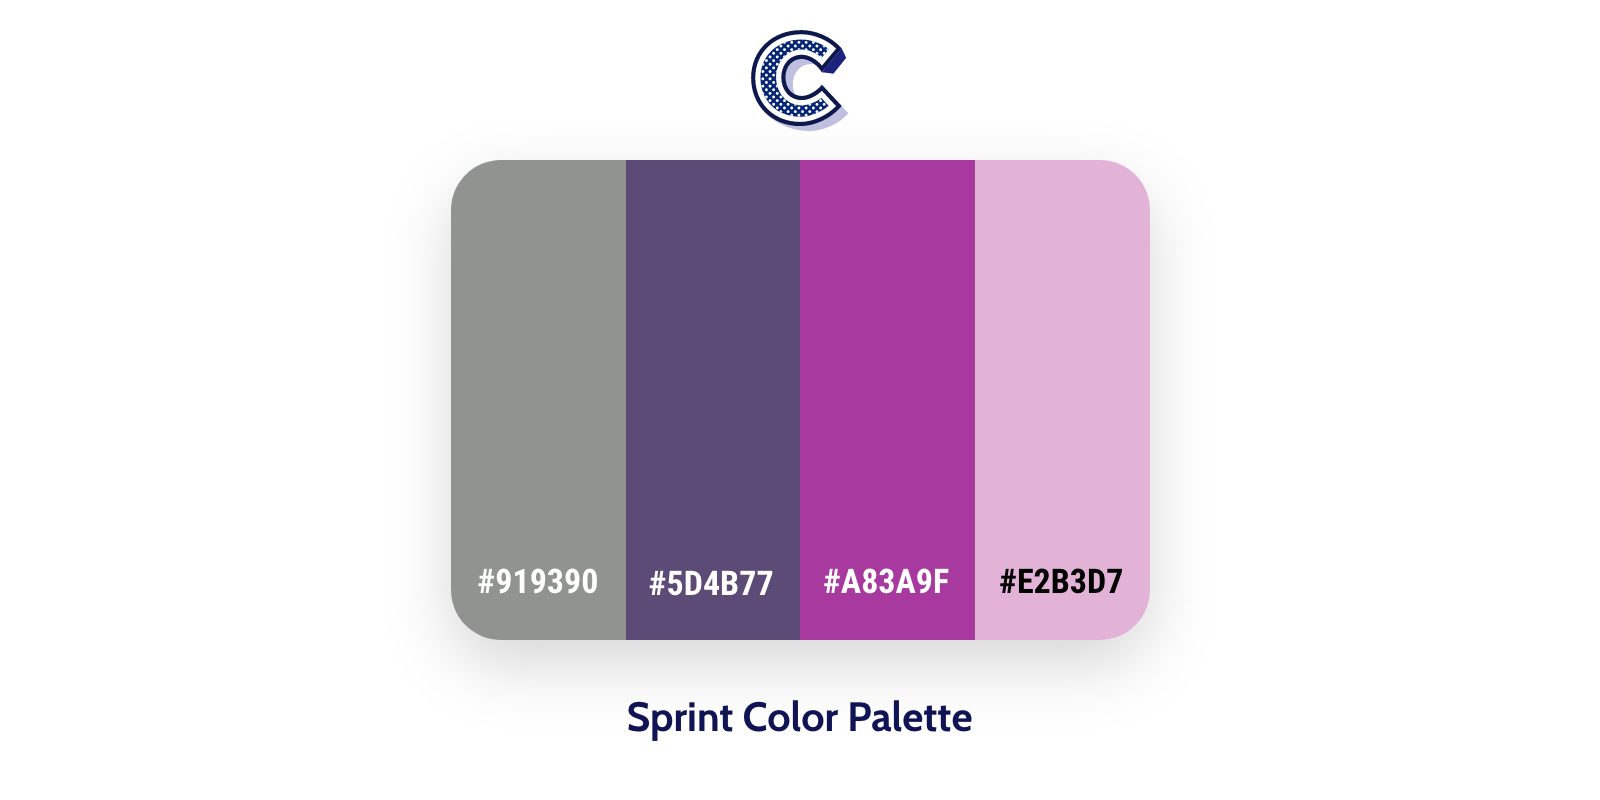 the featured image of sprint color palette